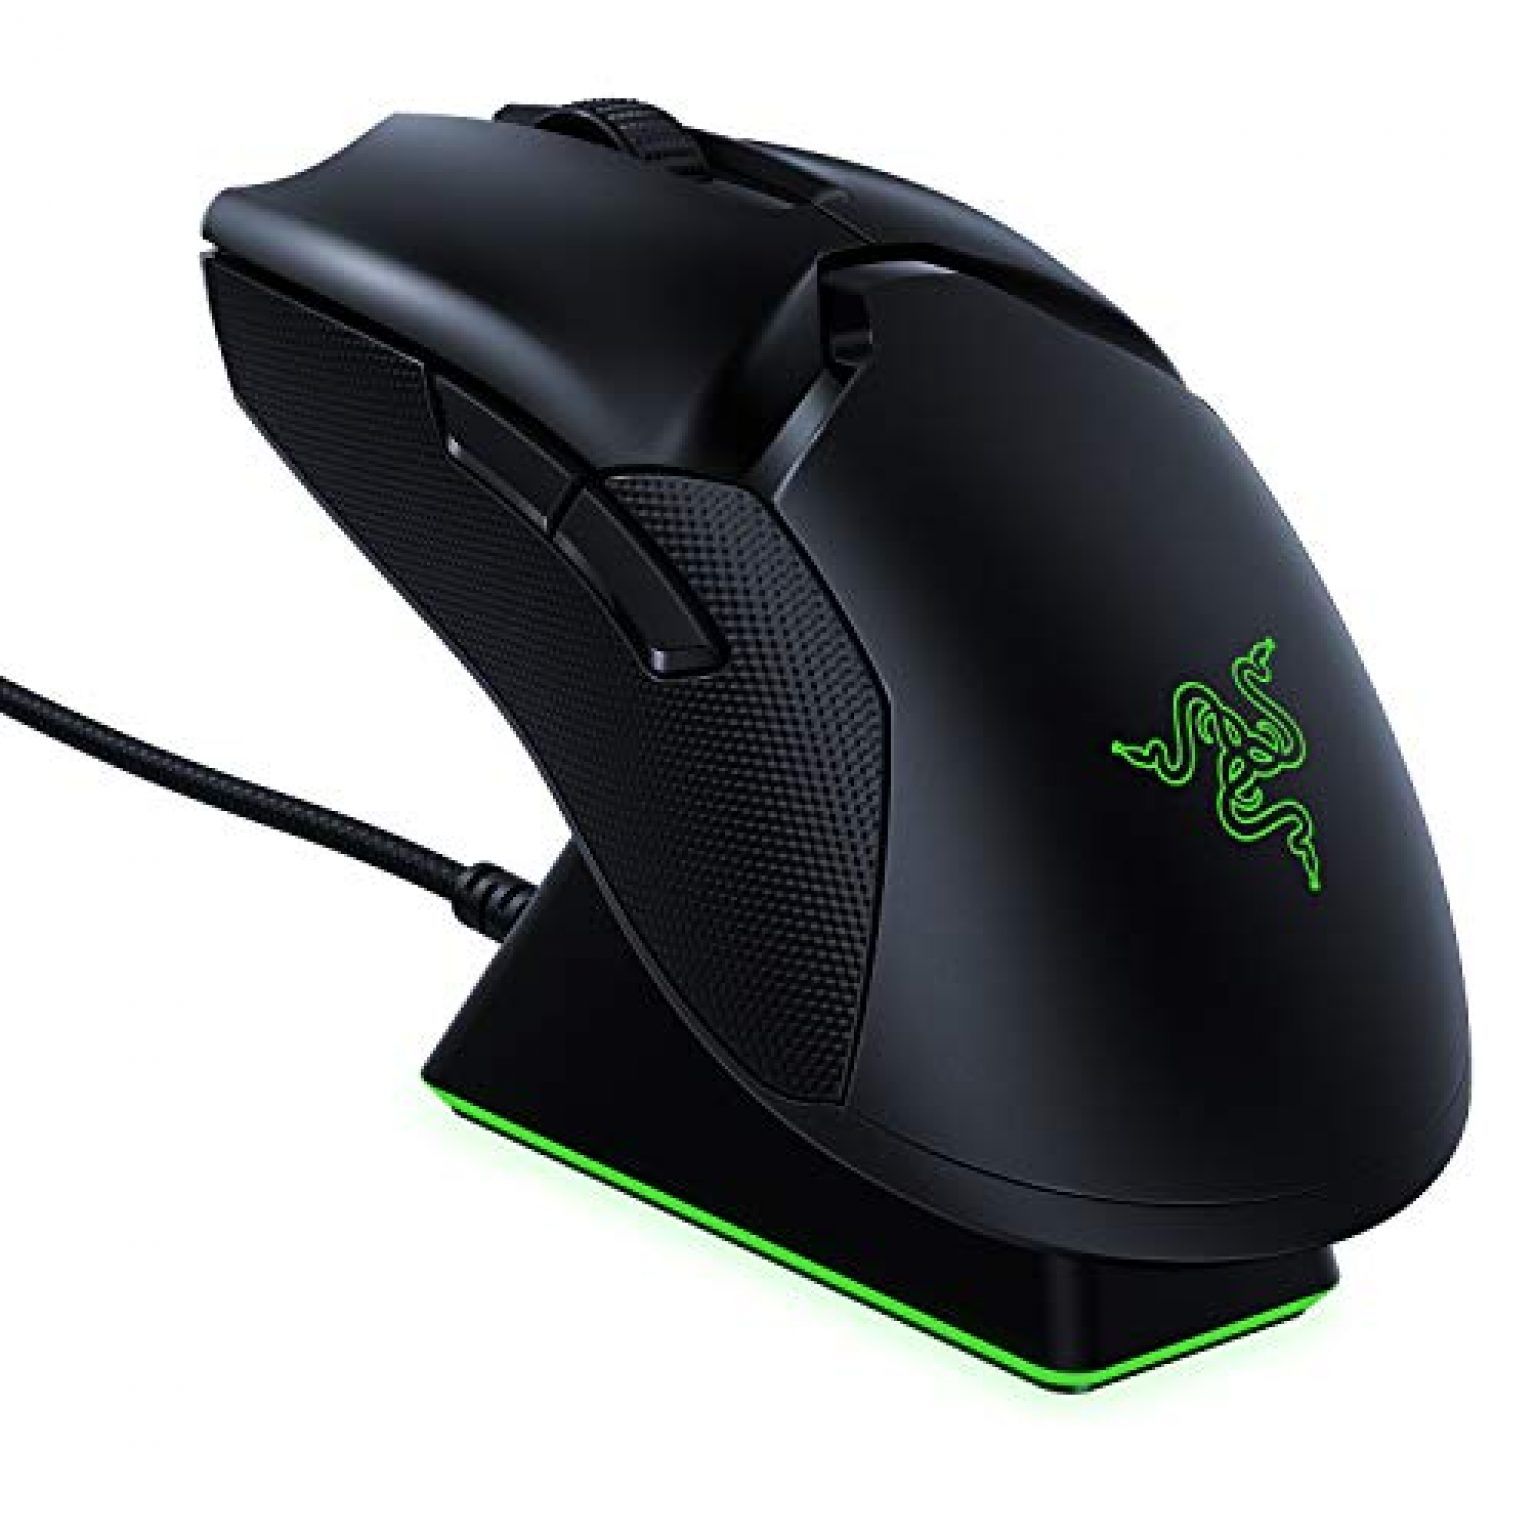 Razer Viper Ultimate Hyperspeed Lightest Wireless Gaming Mouse & RGB